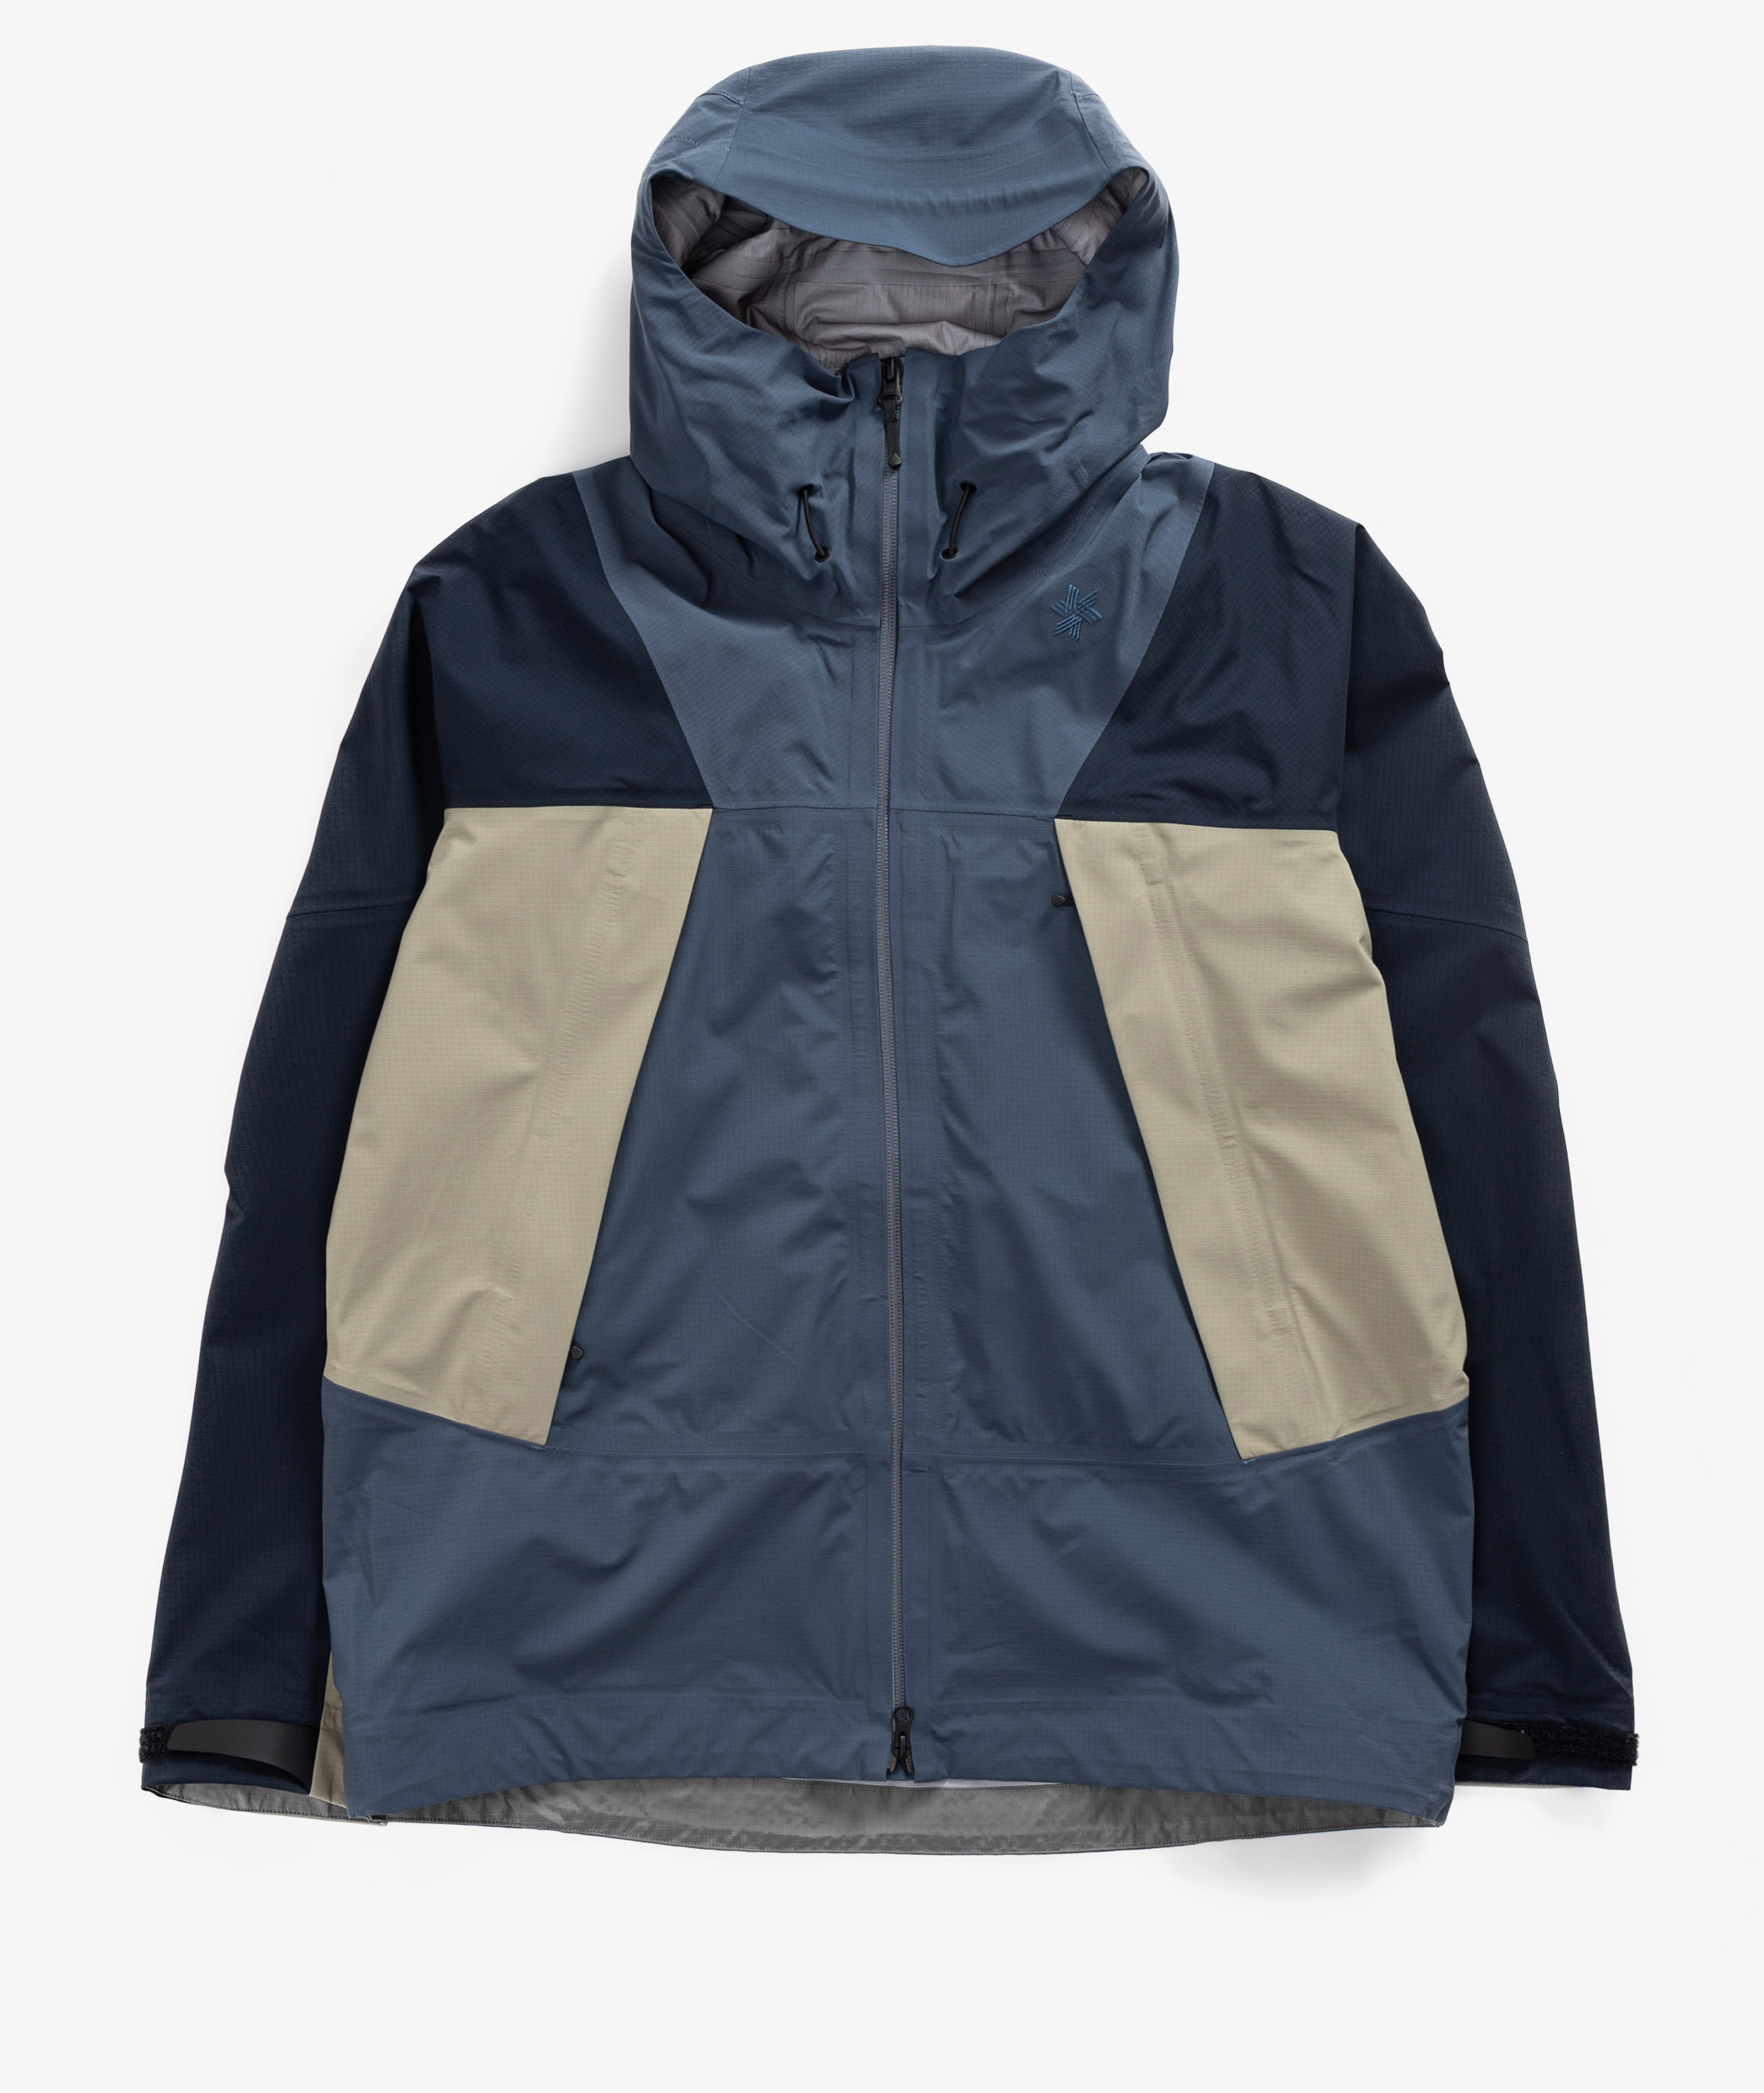 Norse Store  Shipping Worldwide - Goldwin Pertex Shield Air All Weather  Jacket - Foggy Gray / Ink